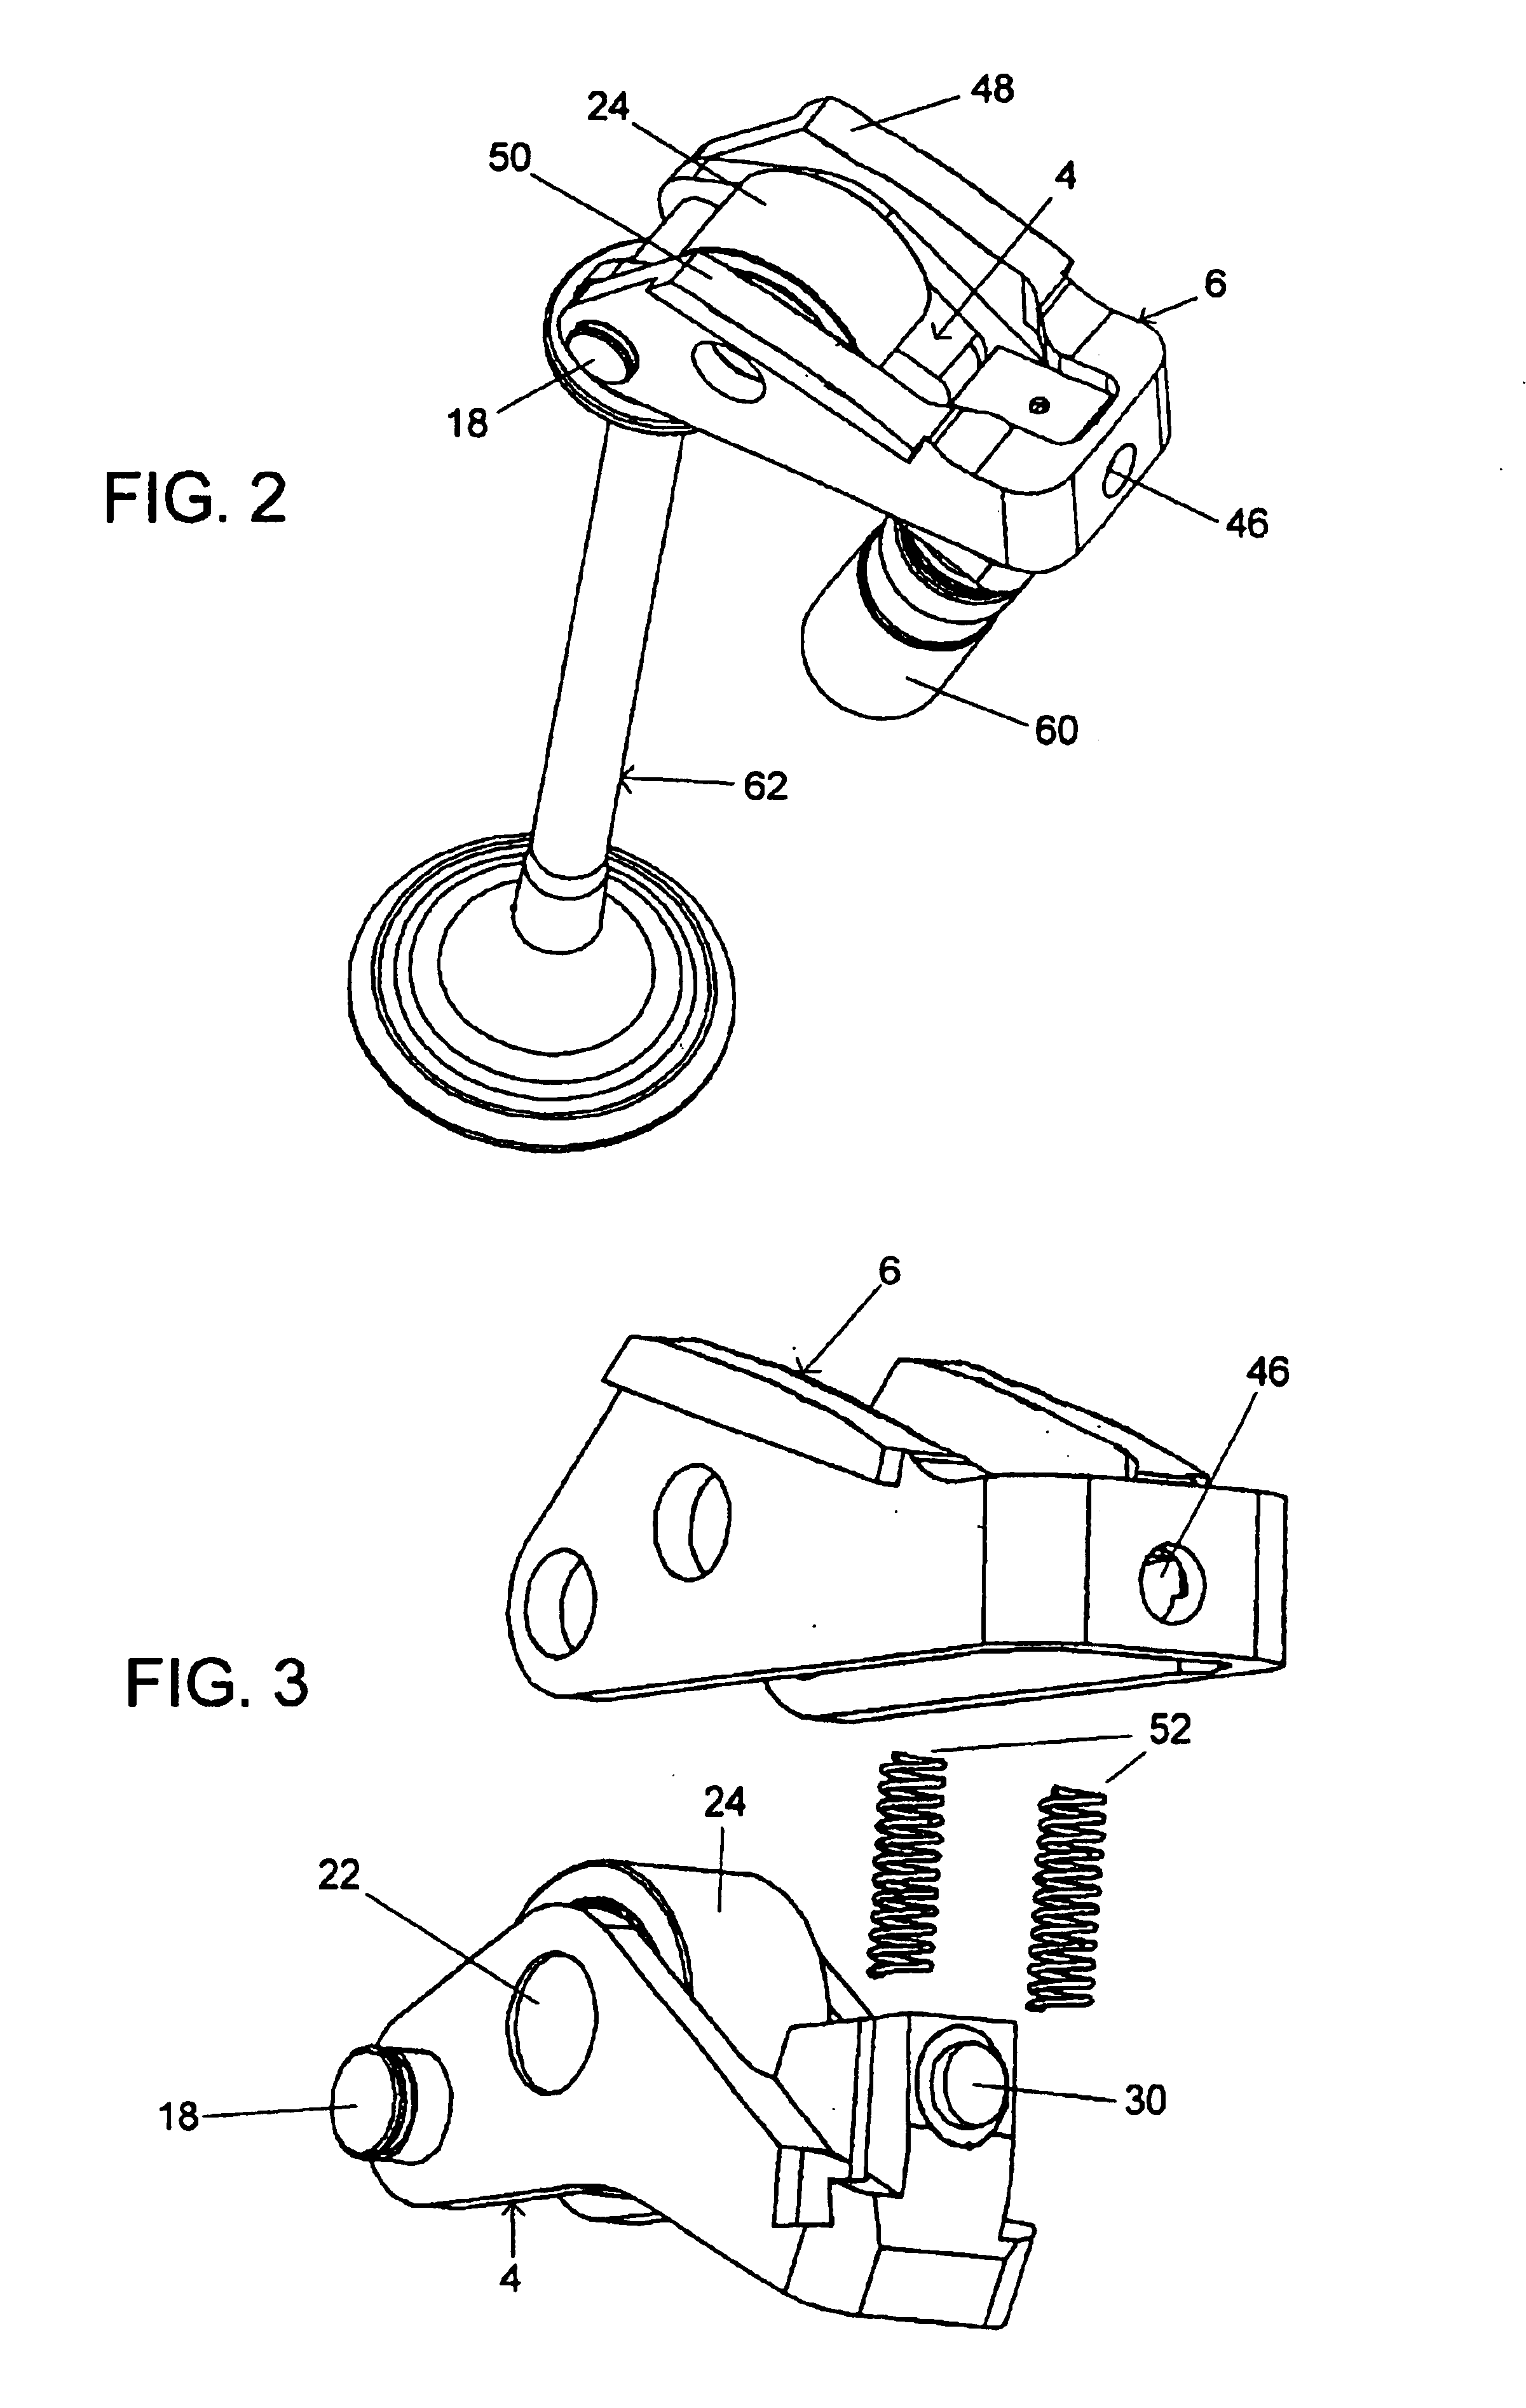 Apparatus for the adjustment of the stroke of a valve actuated by a camshaft